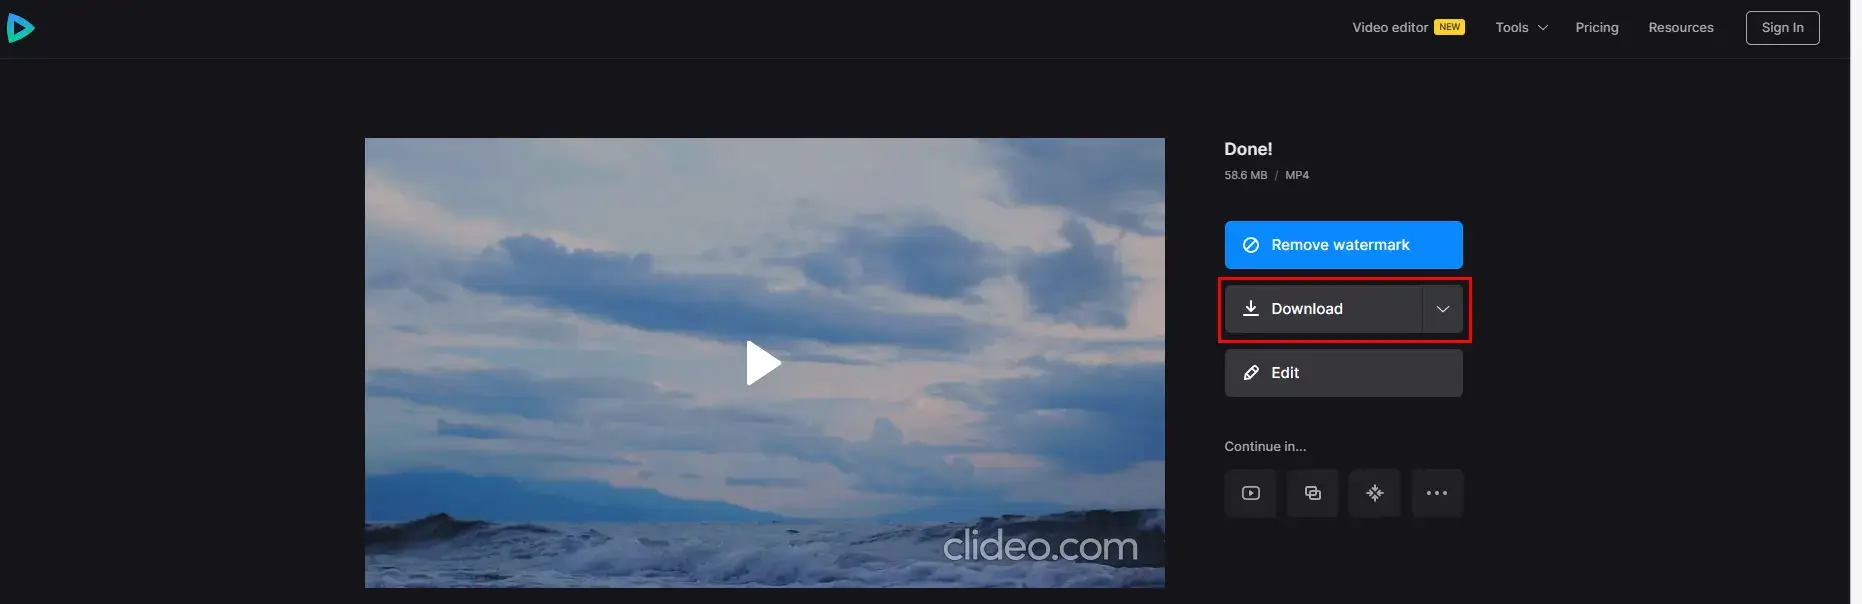 how to crop a youtube video through clideo 